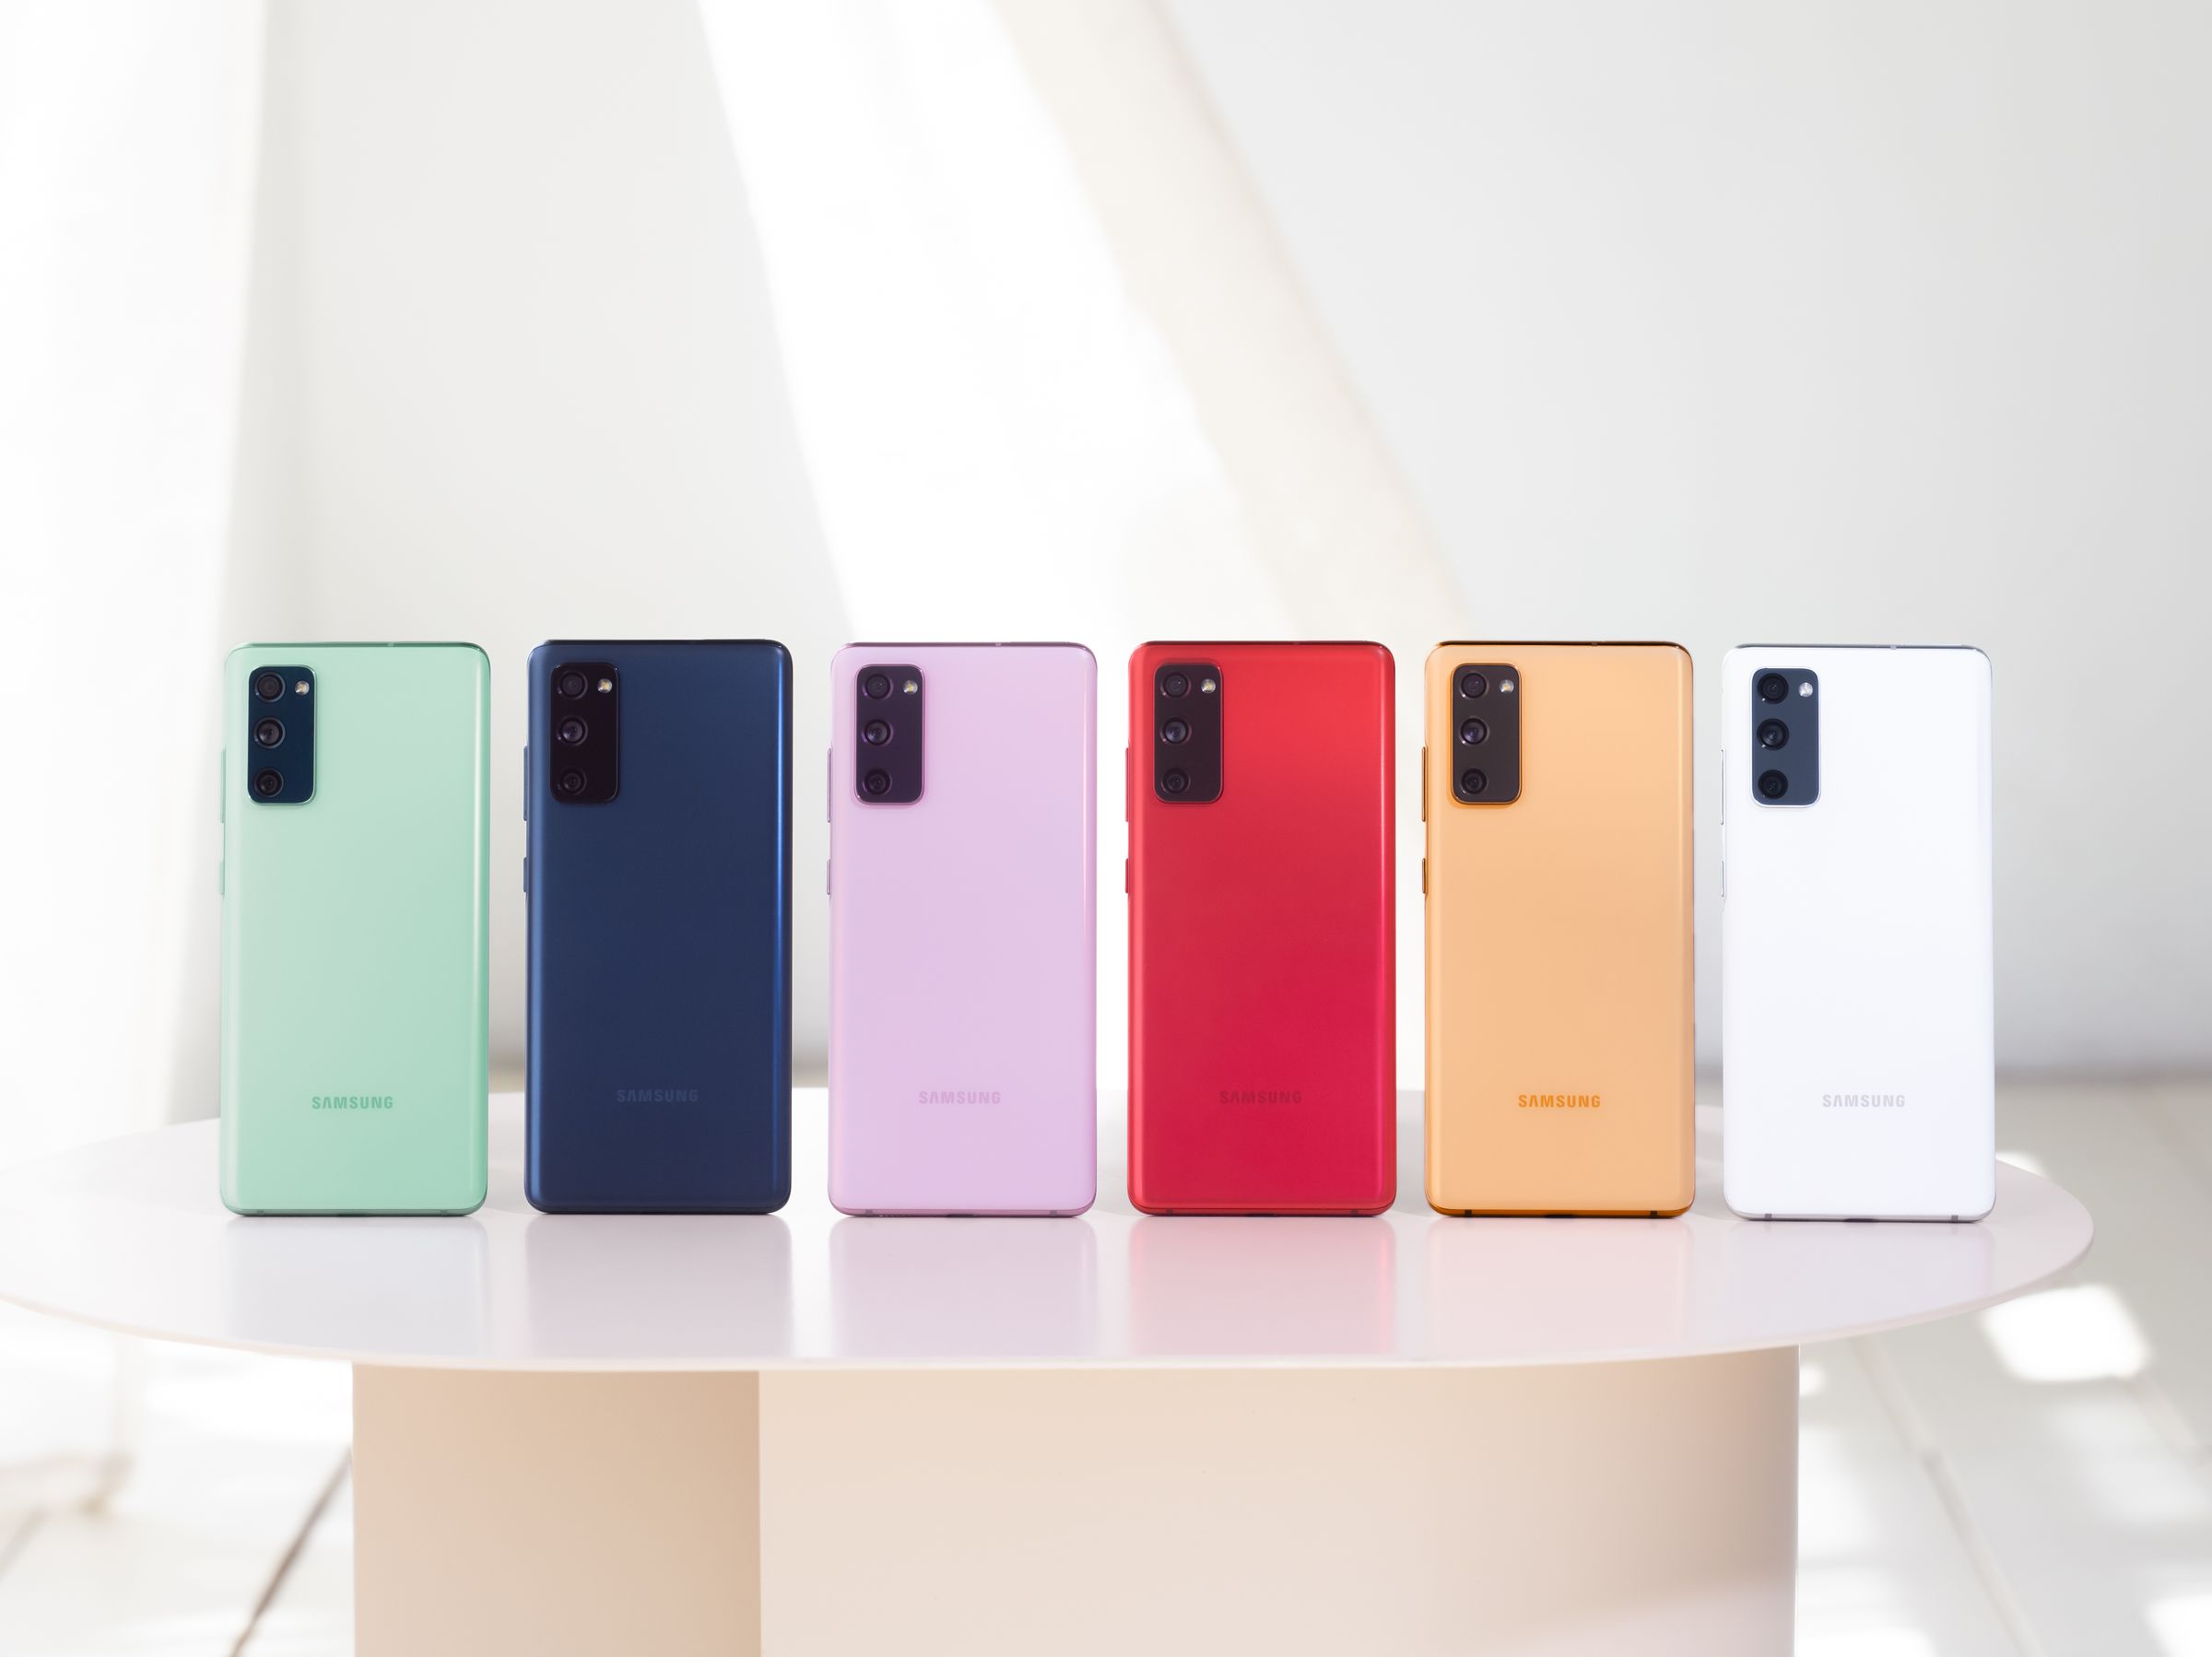 The Galaxy S20 FE 5G comes in many different colors.